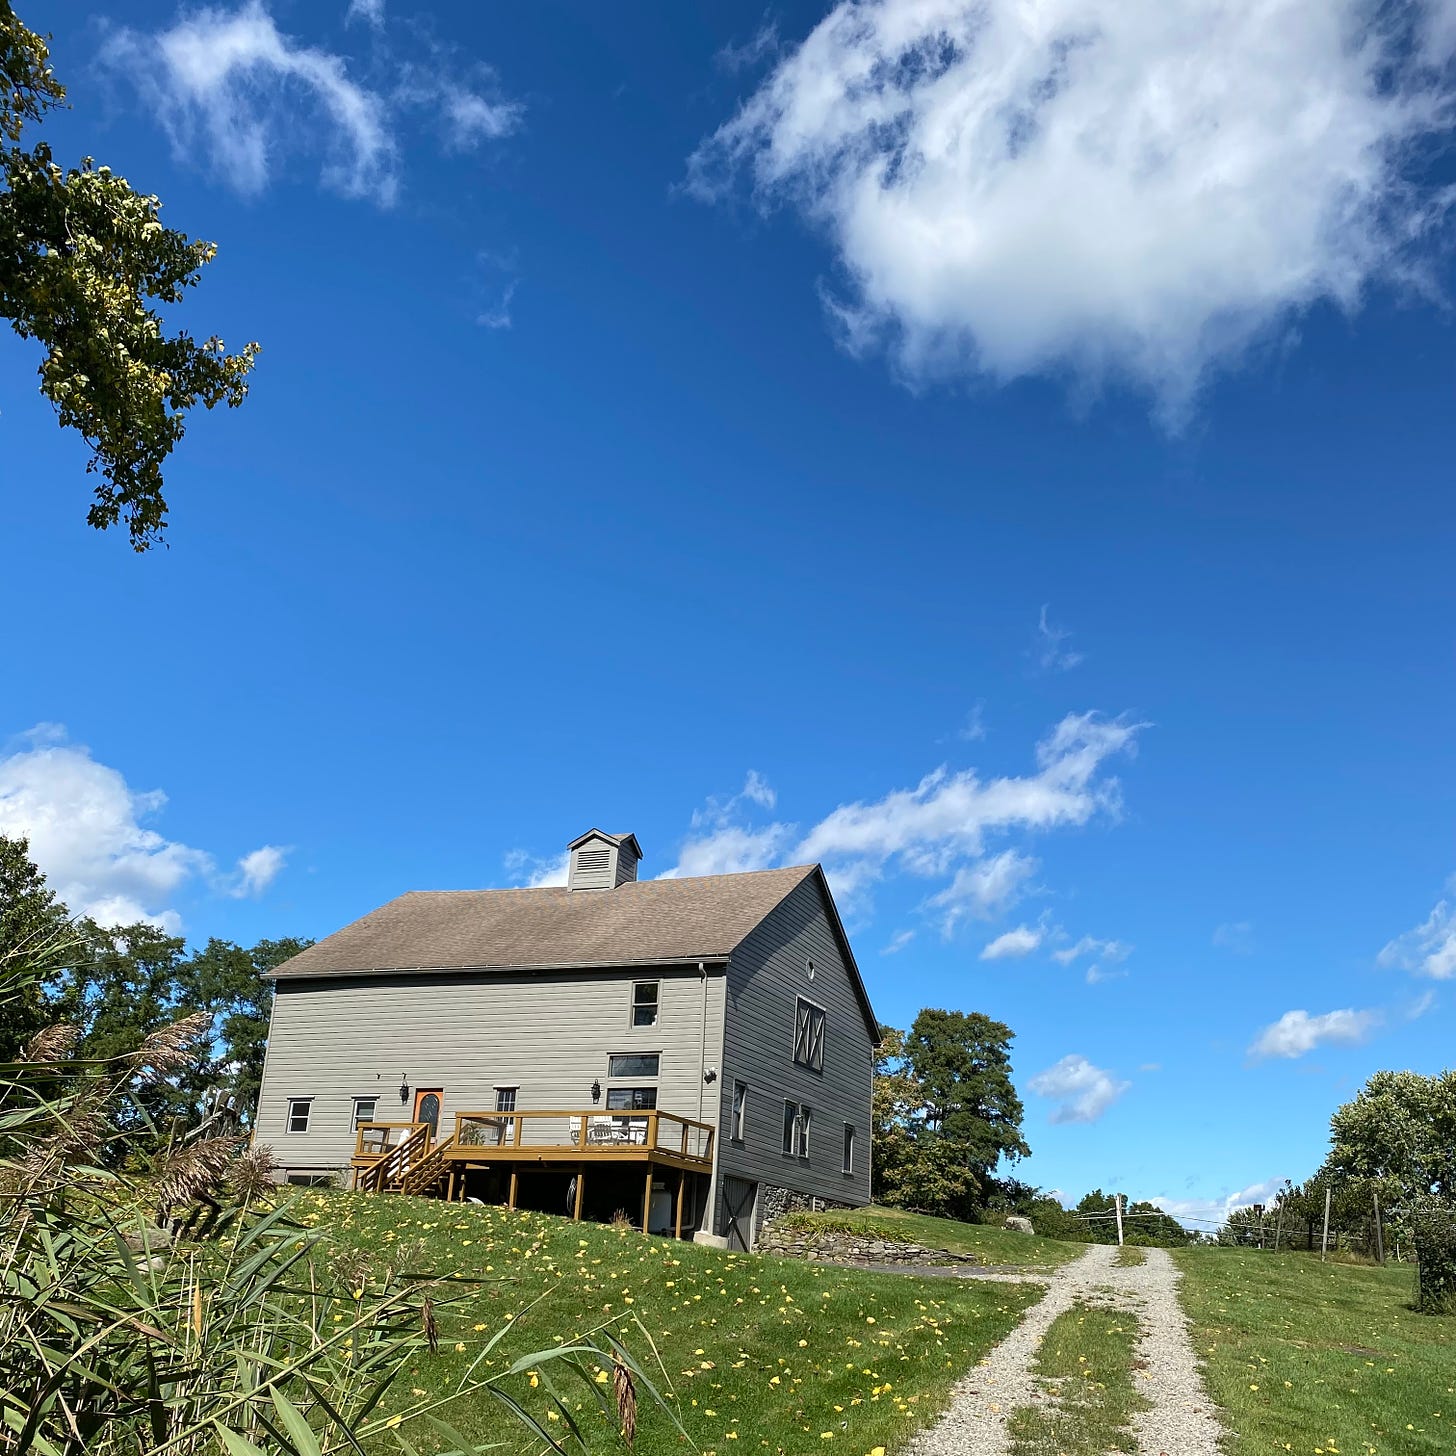 A blue sky, green grass and a grey barn with a brown deck.